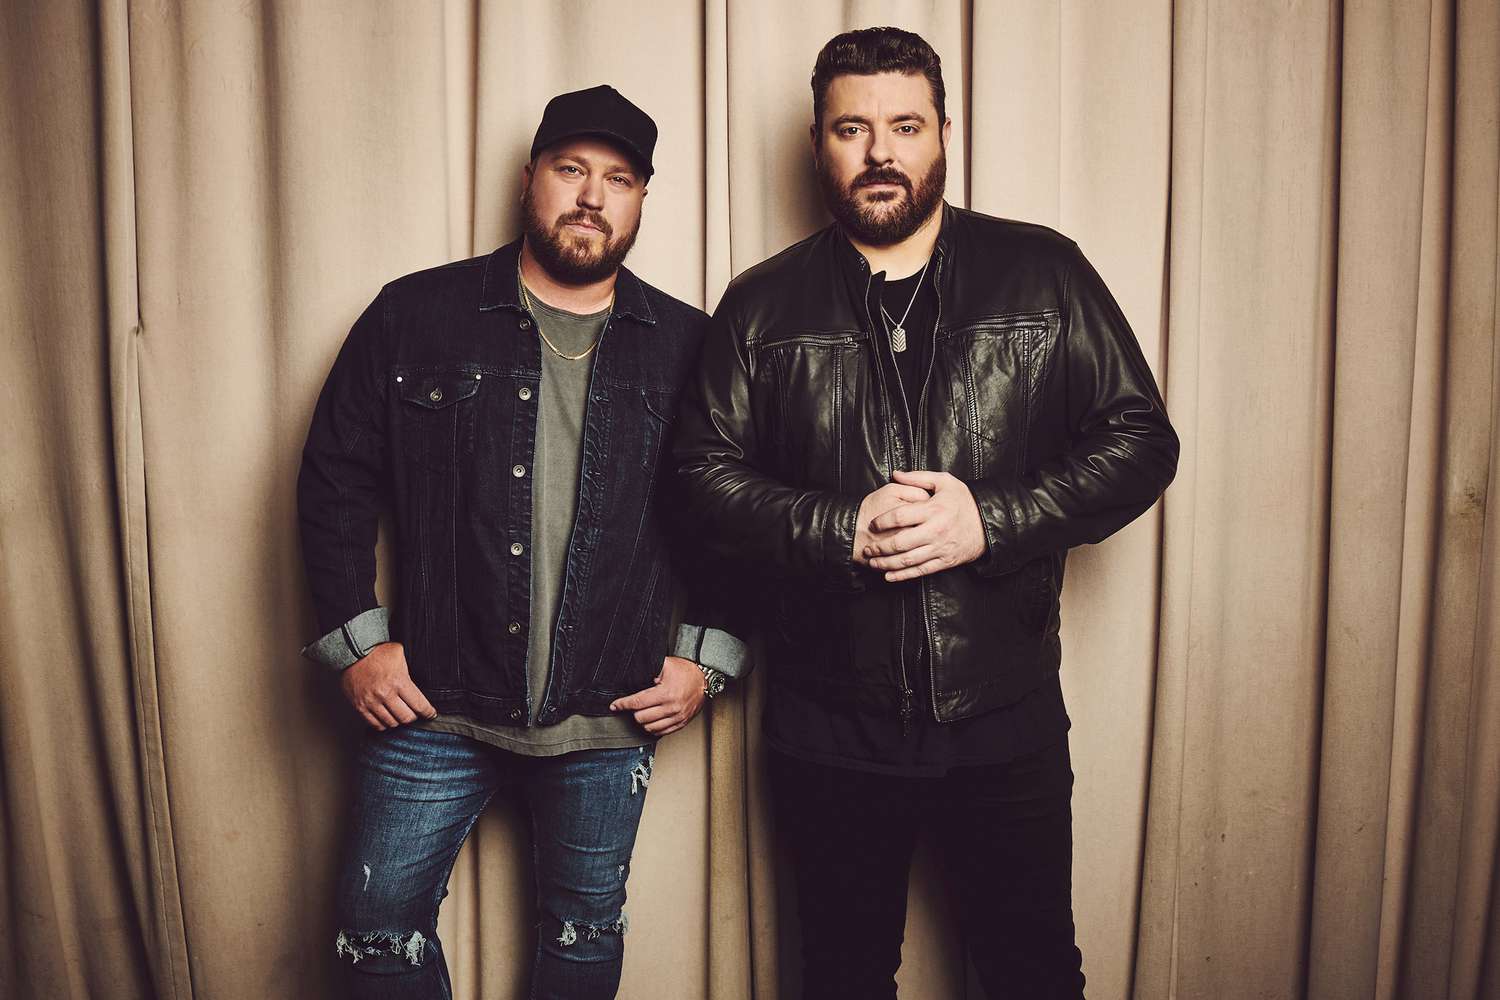 Chris Young and Mitchell Tenpenny